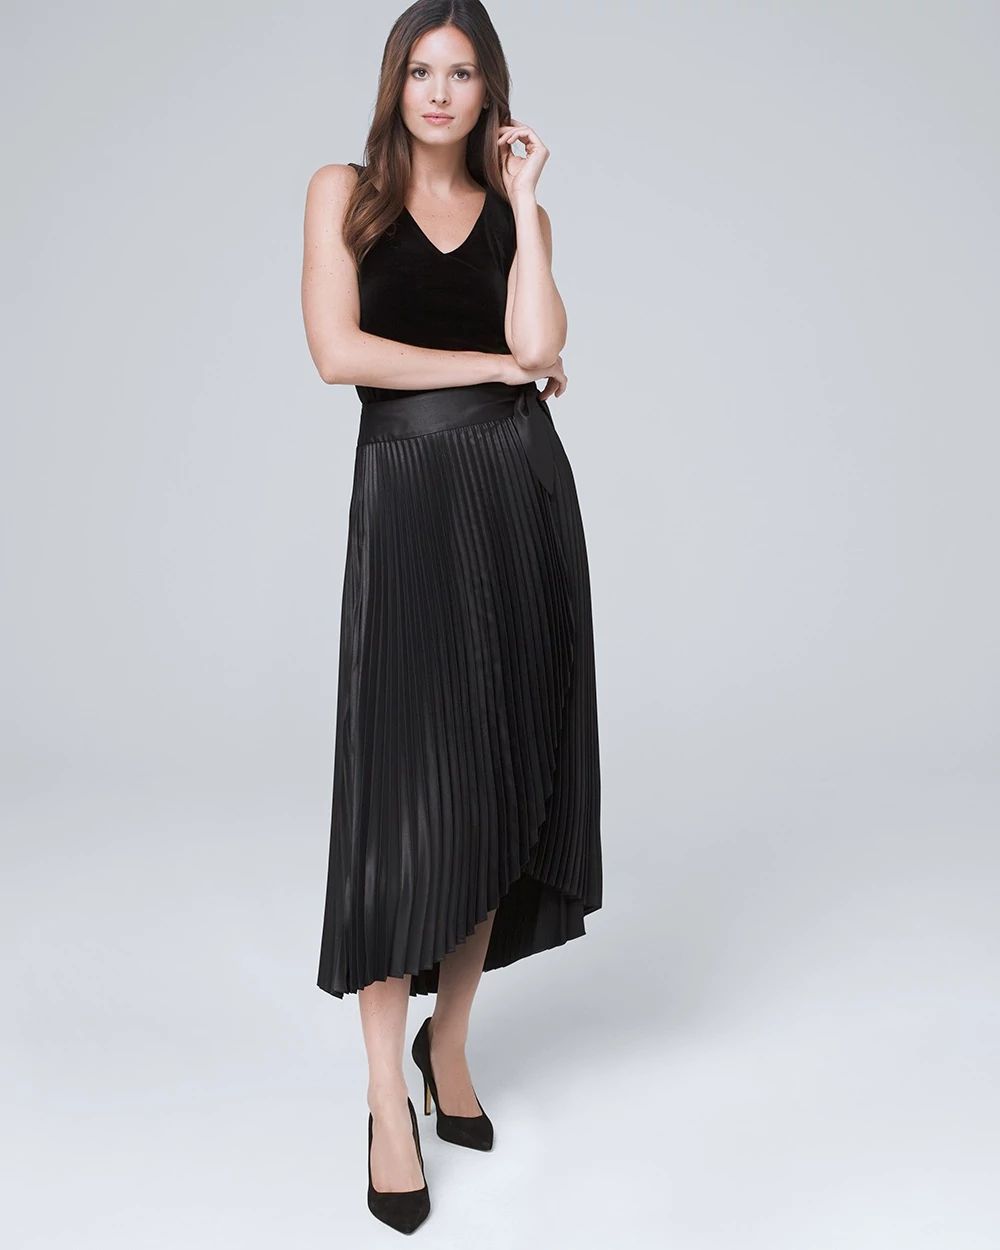 Metallic Pleated Wrap Midi Skirt click to view larger image.